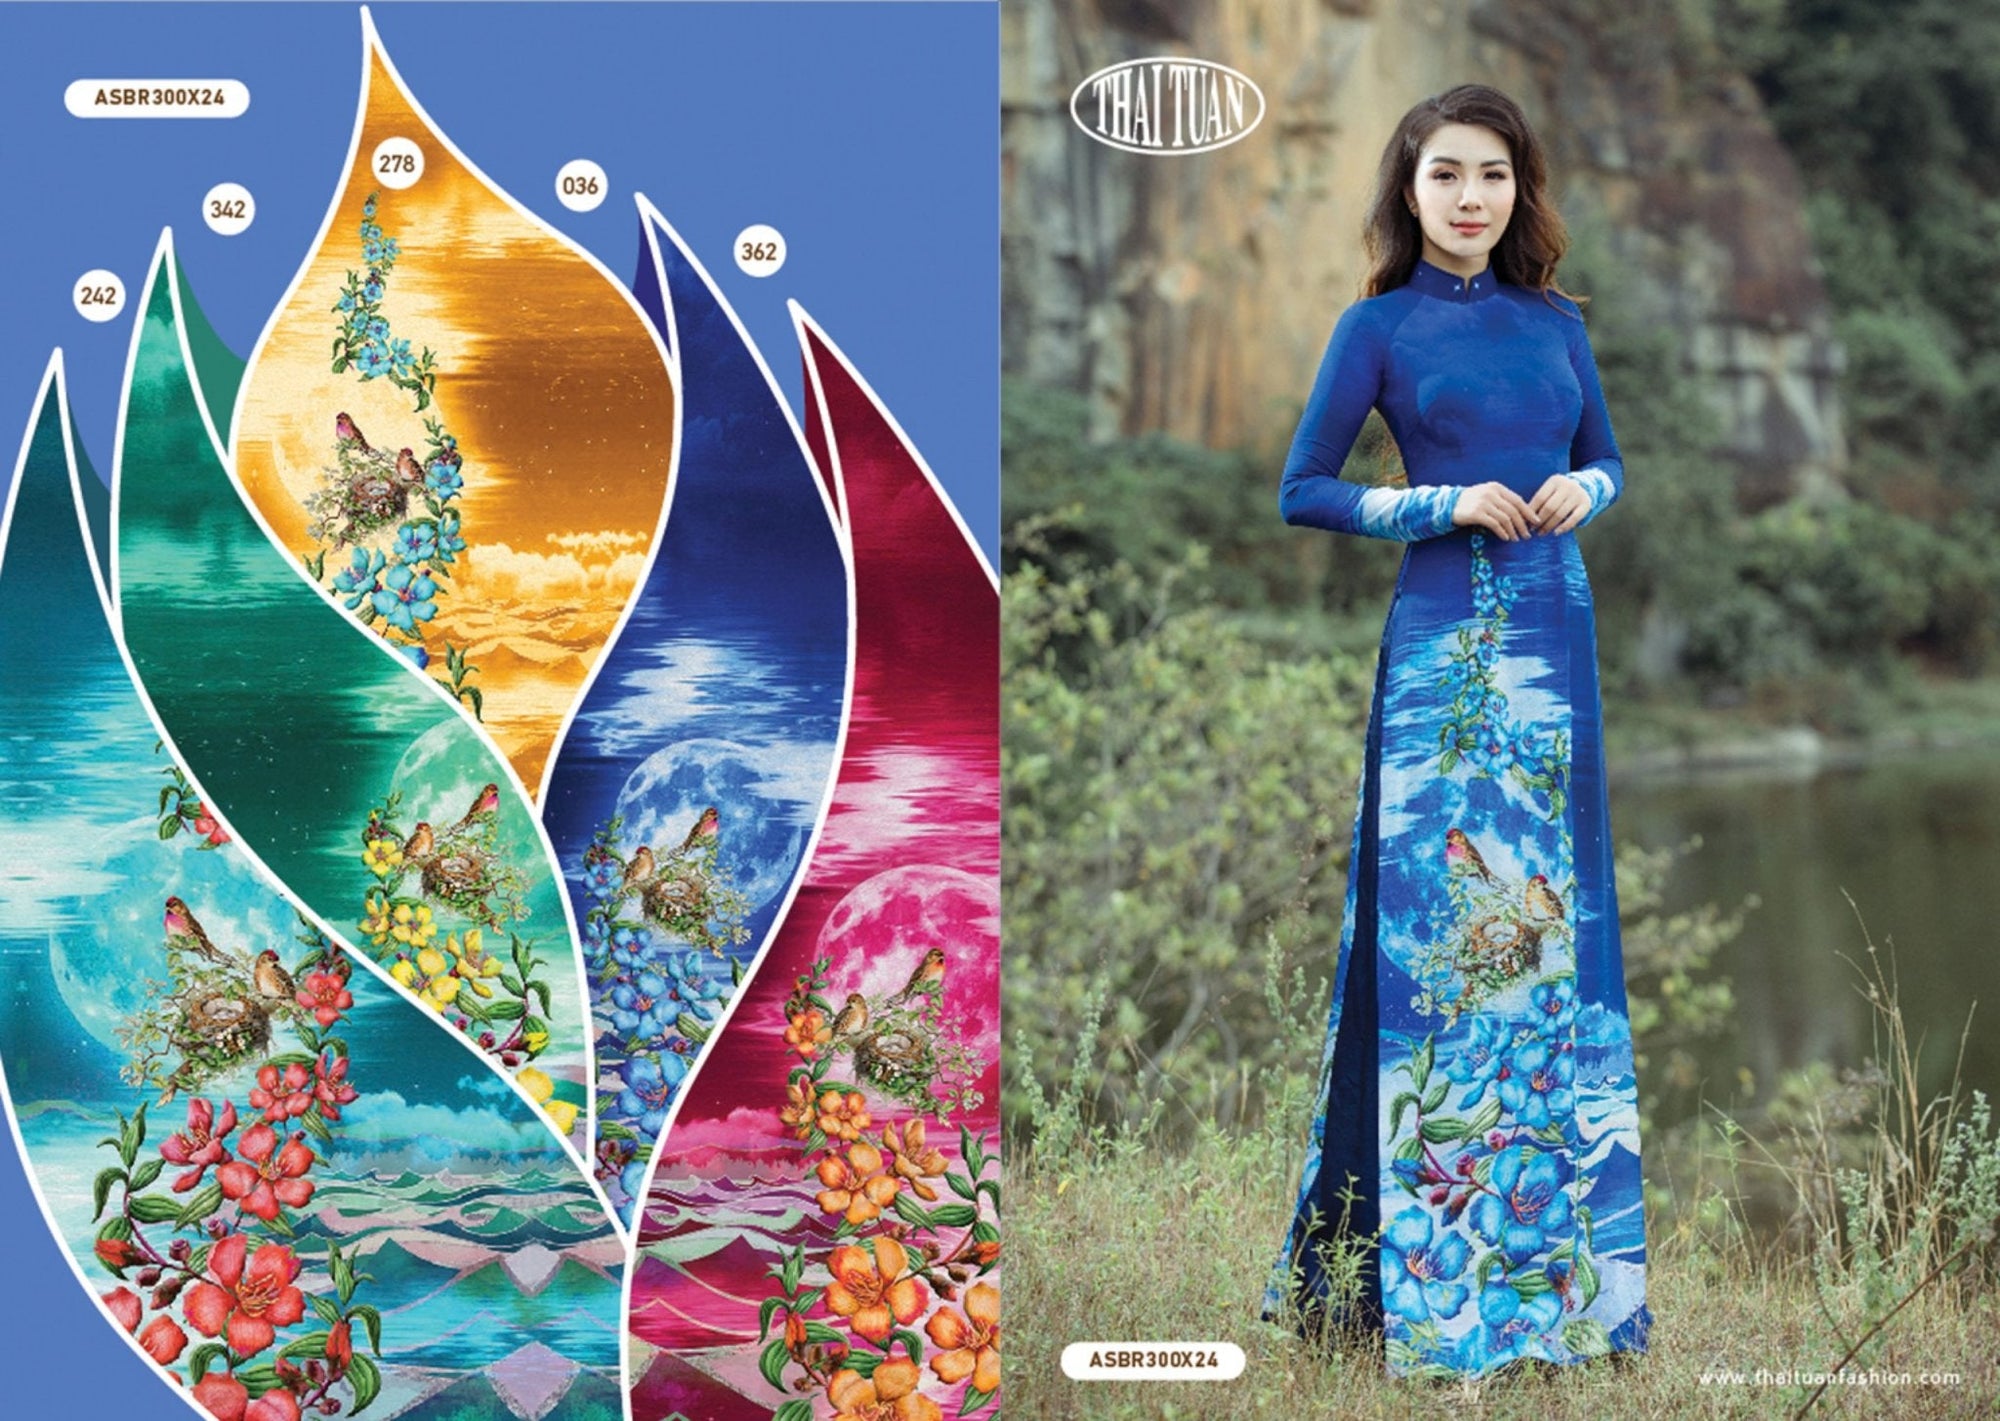 Made-to-measure ao dai by Mark&Vy using high quality, Thai Tuan fabric. Beautiful, bird/floral motif.